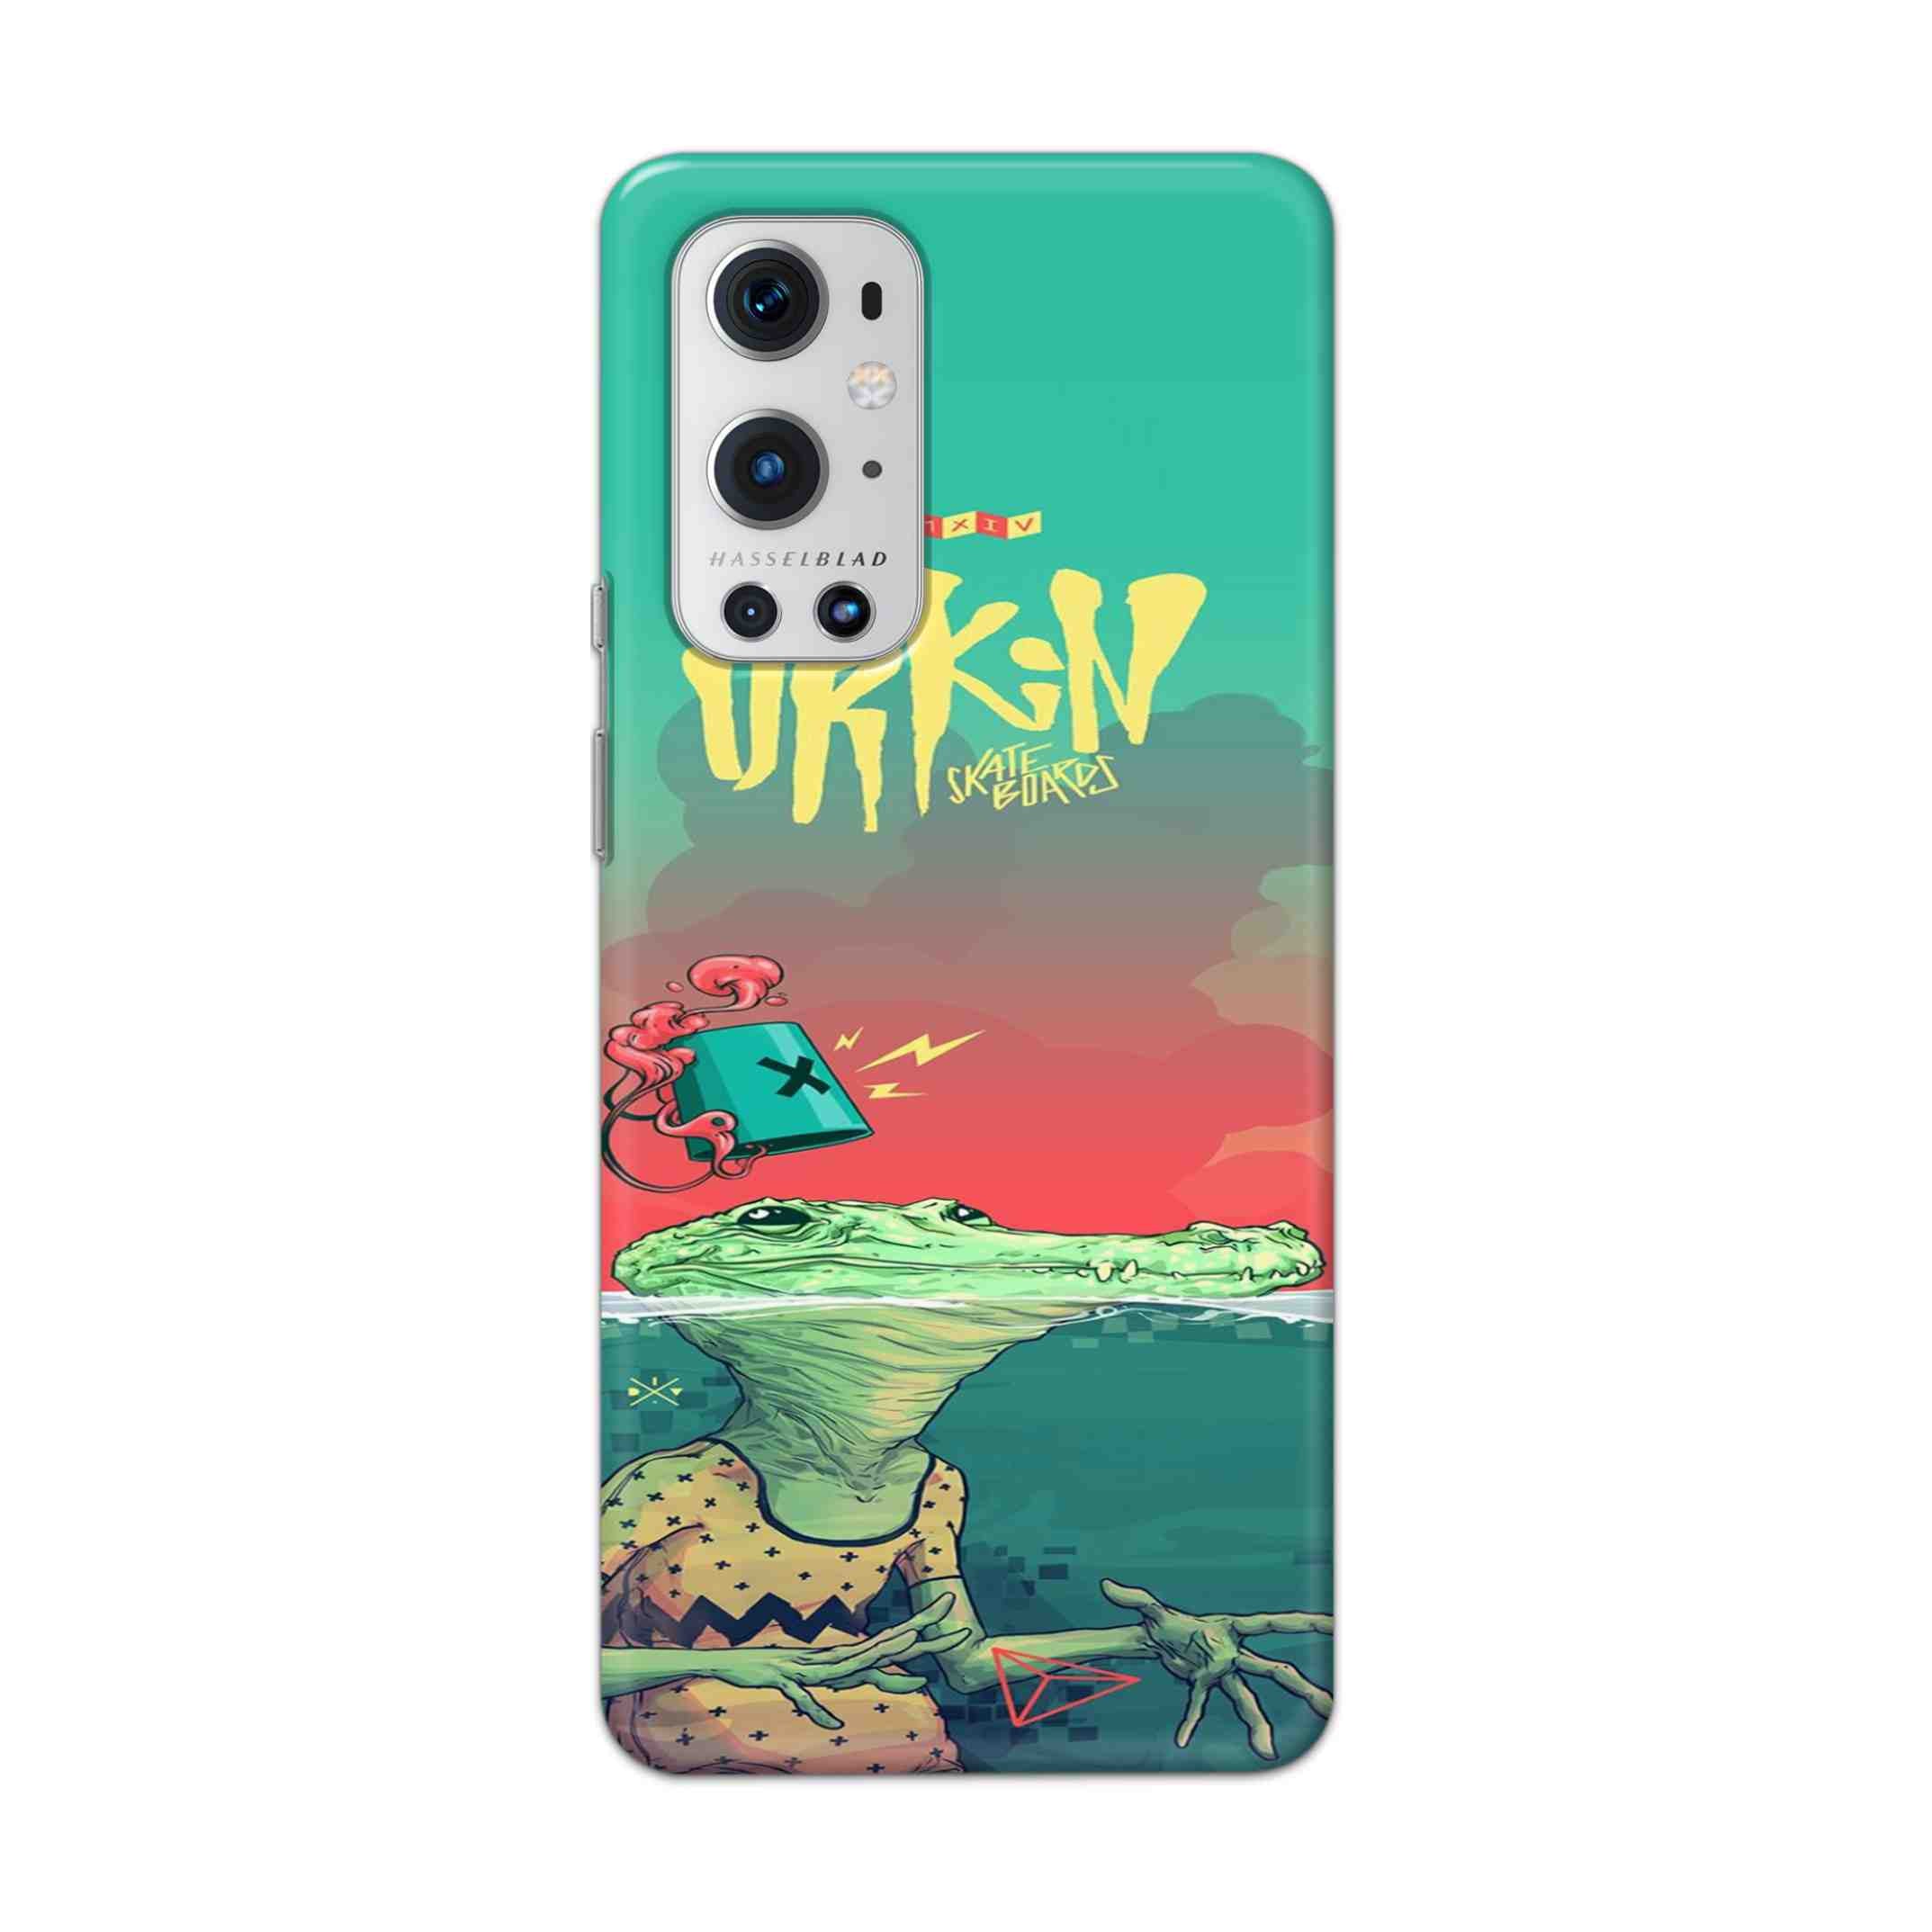 Buy Urkin Hard Back Mobile Phone Case Cover For OnePlus 9 Pro Online